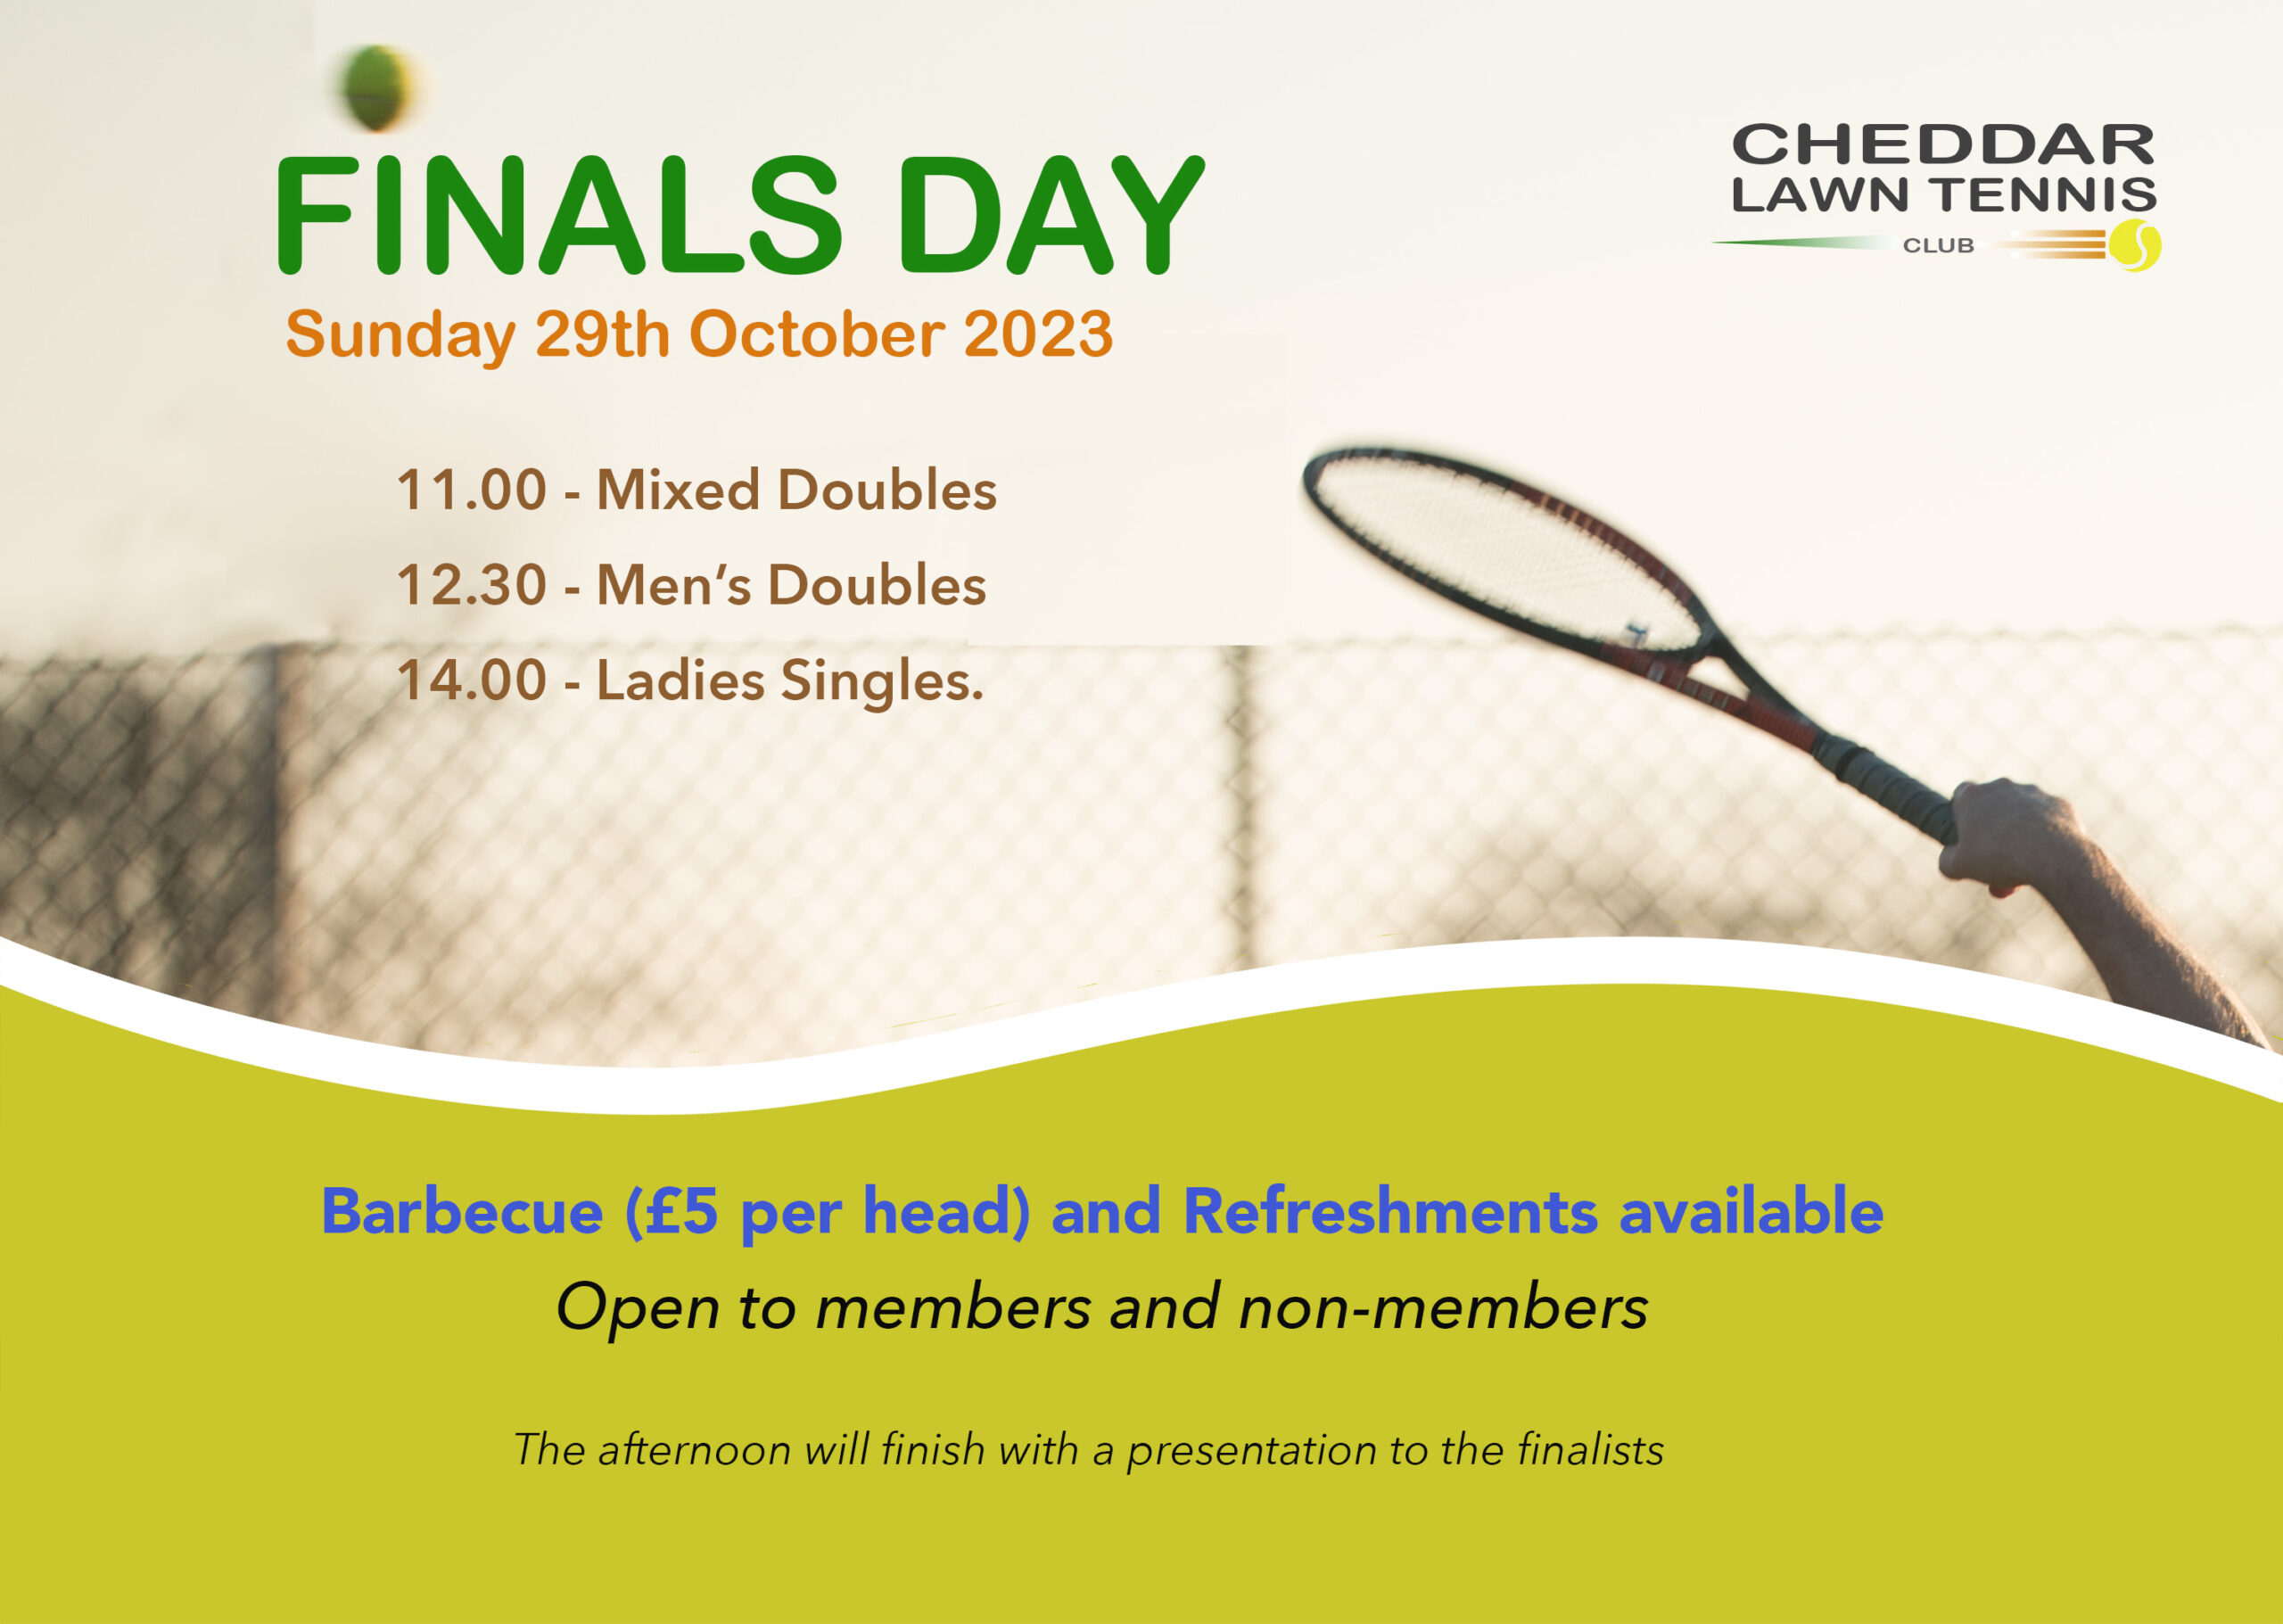 Cheddar Tennis Club Championships 2023: Register To Attend The Event